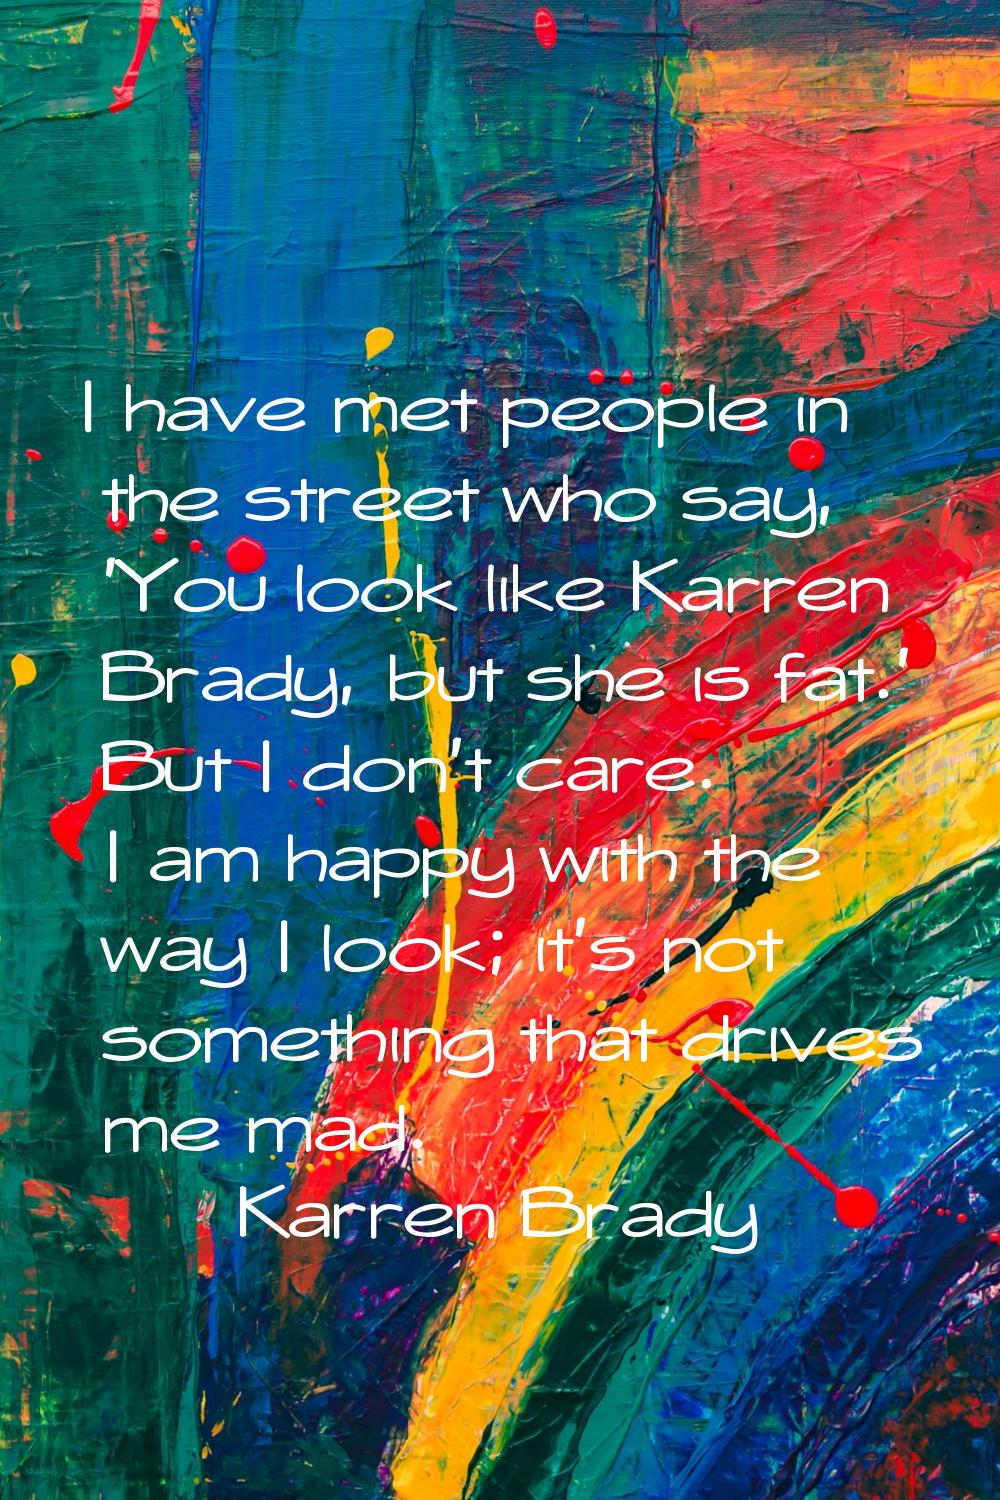 I have met people in the street who say, 'You look like Karren Brady, but she is fat.' But I don't 